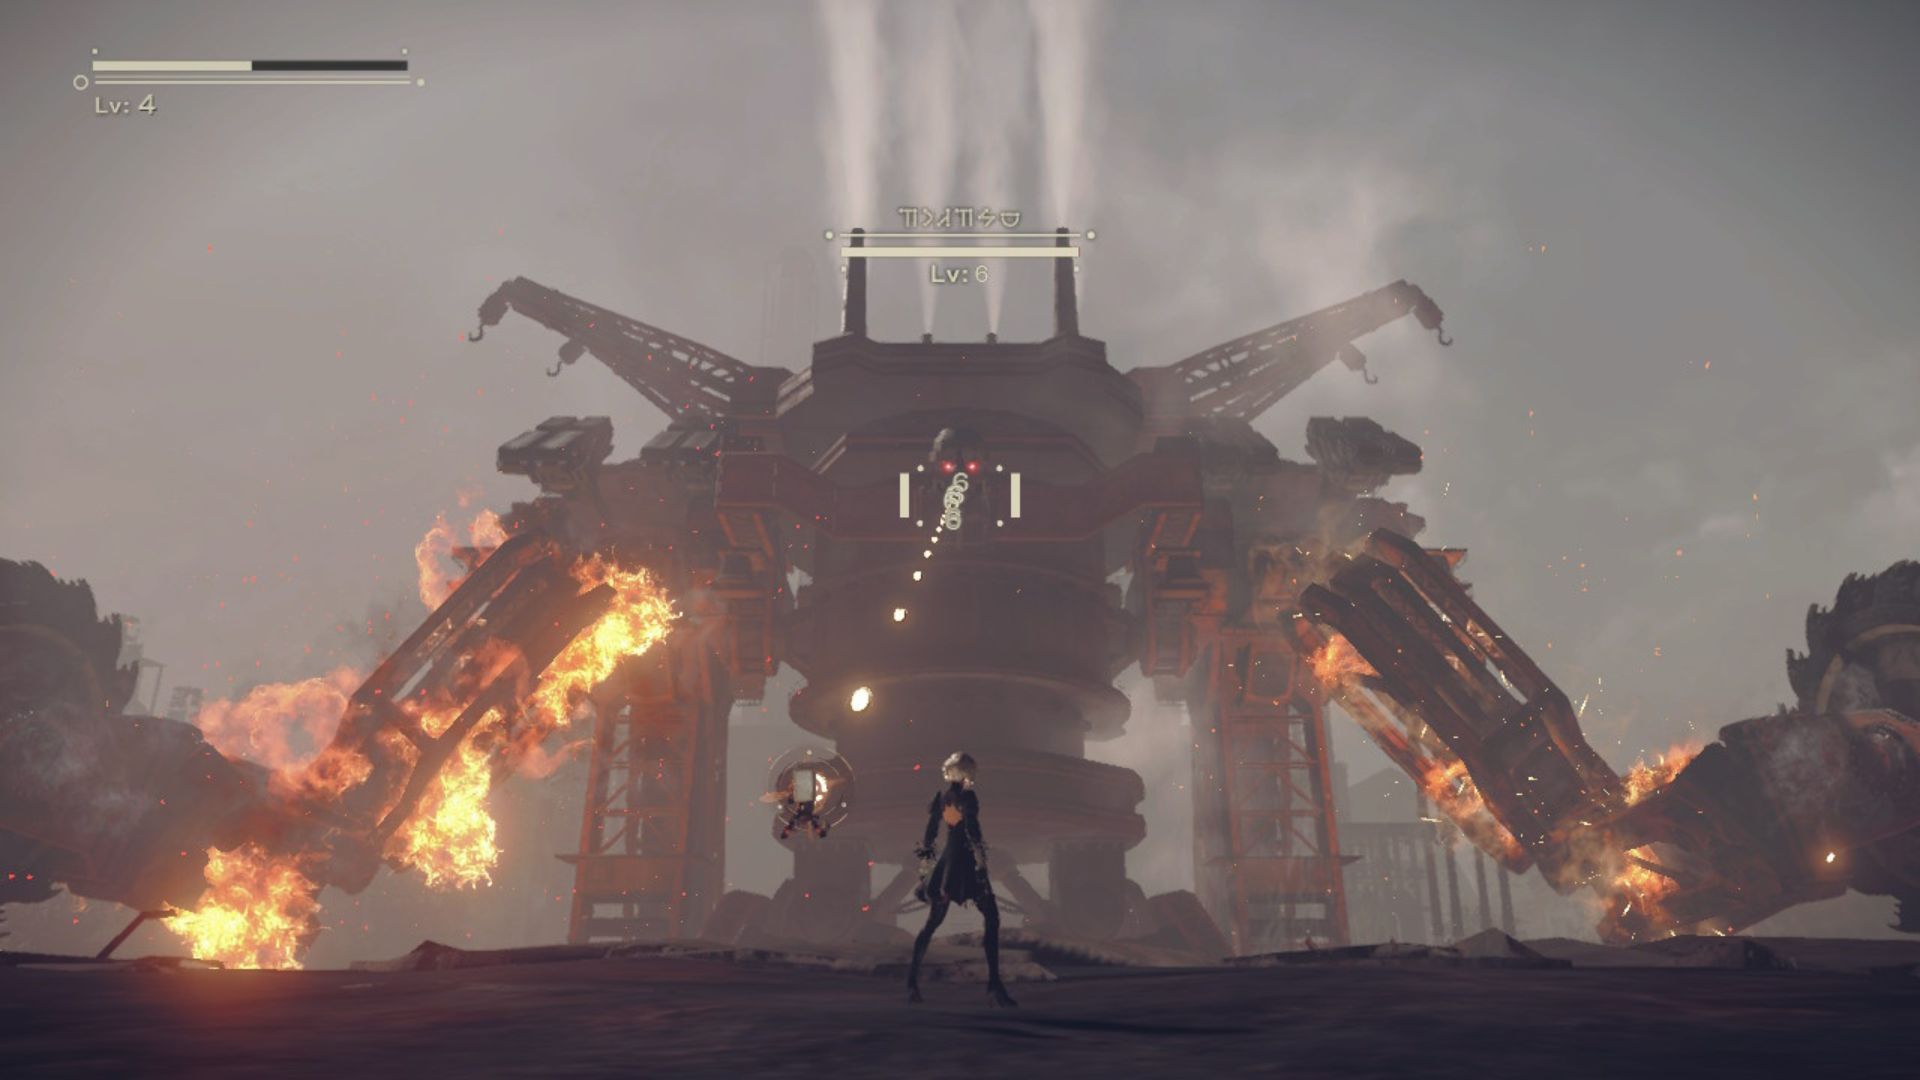 Review - NieR:Automata The End of YoRHa Edition (Switch)